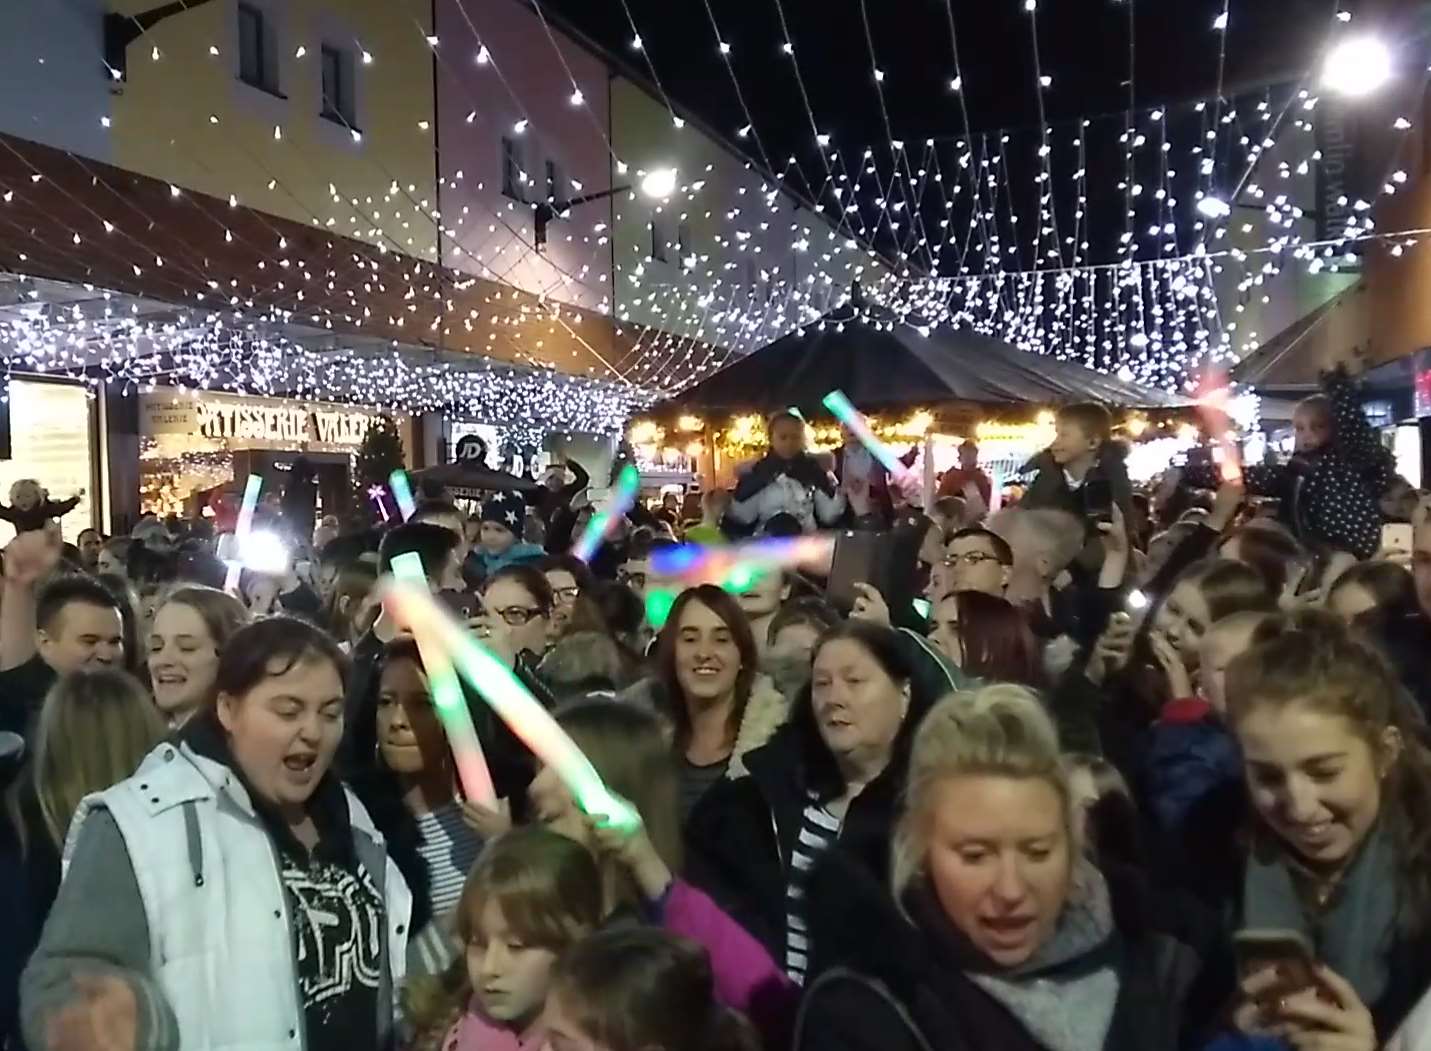 Revellers danced and sang at the big switch-on moment